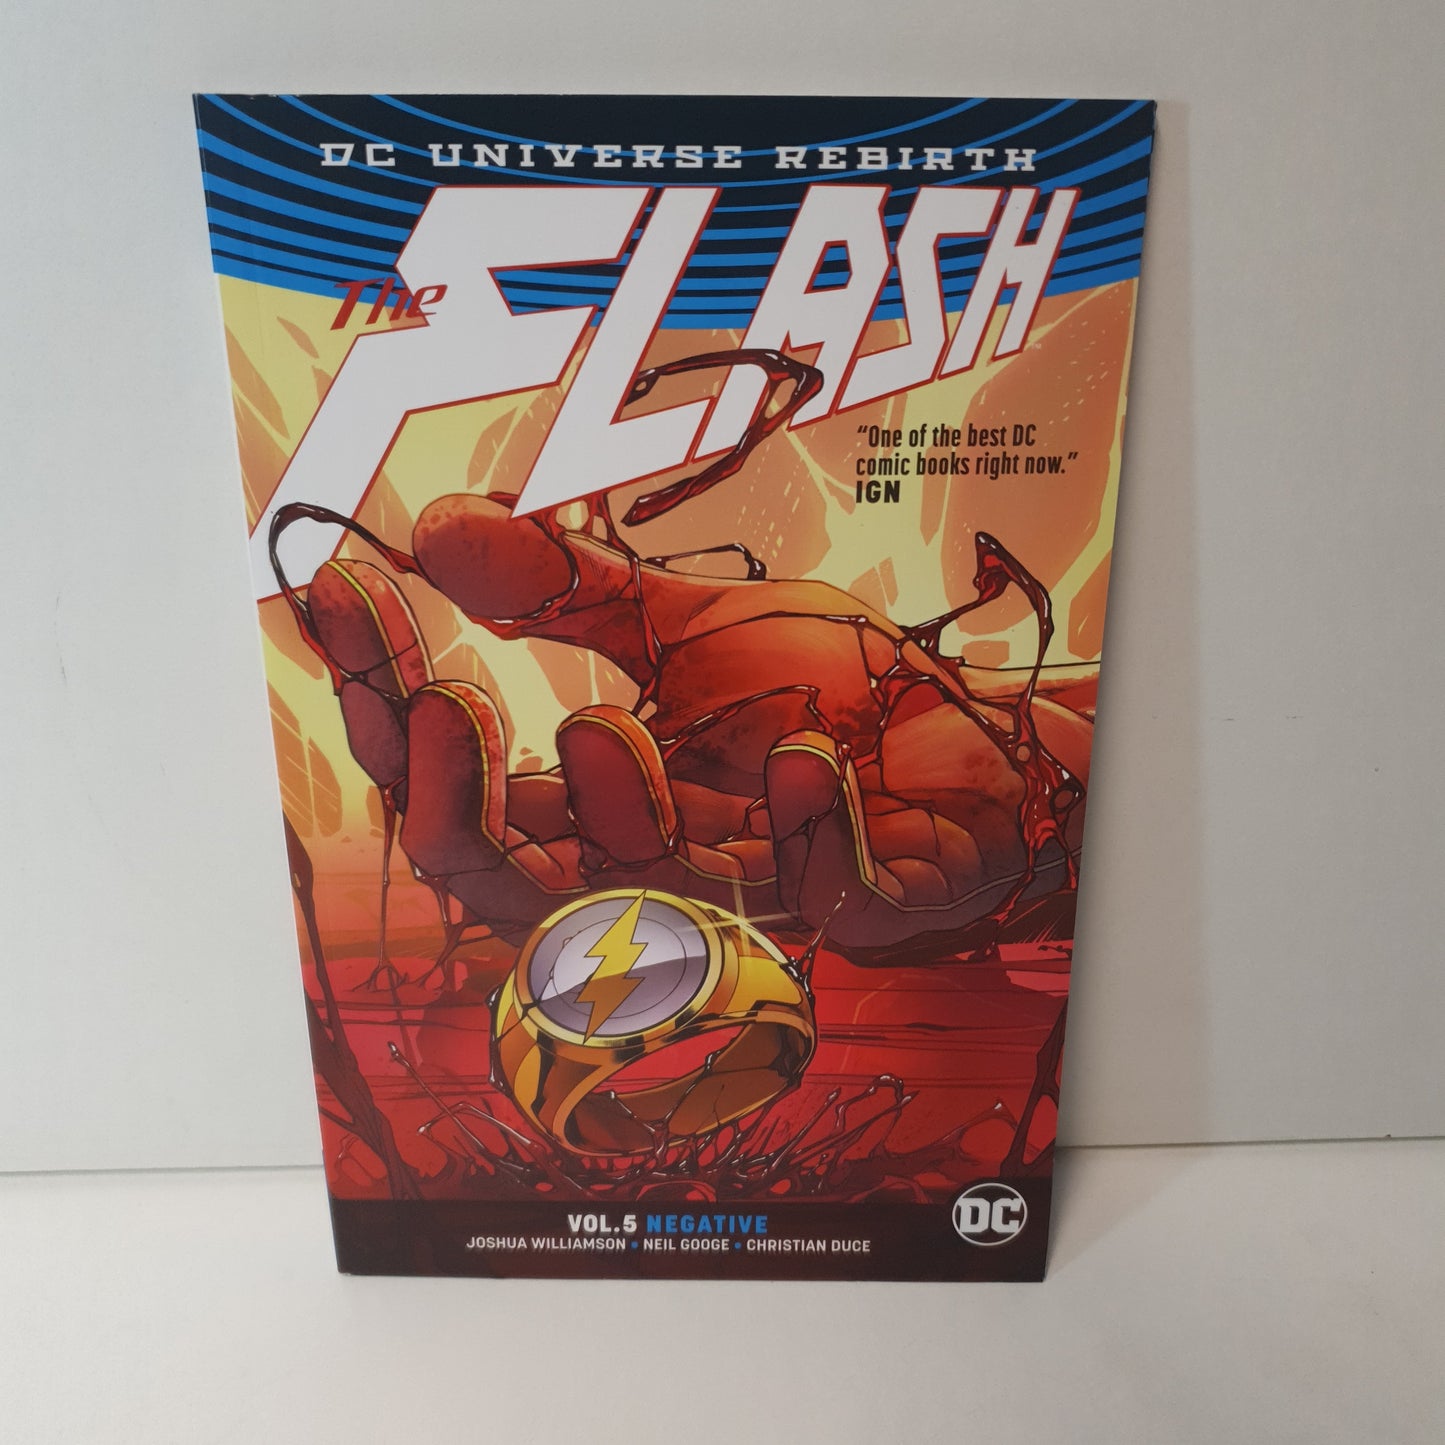 The Flash Vol 5 Negative by Williamson, Googe & Duce (2018)